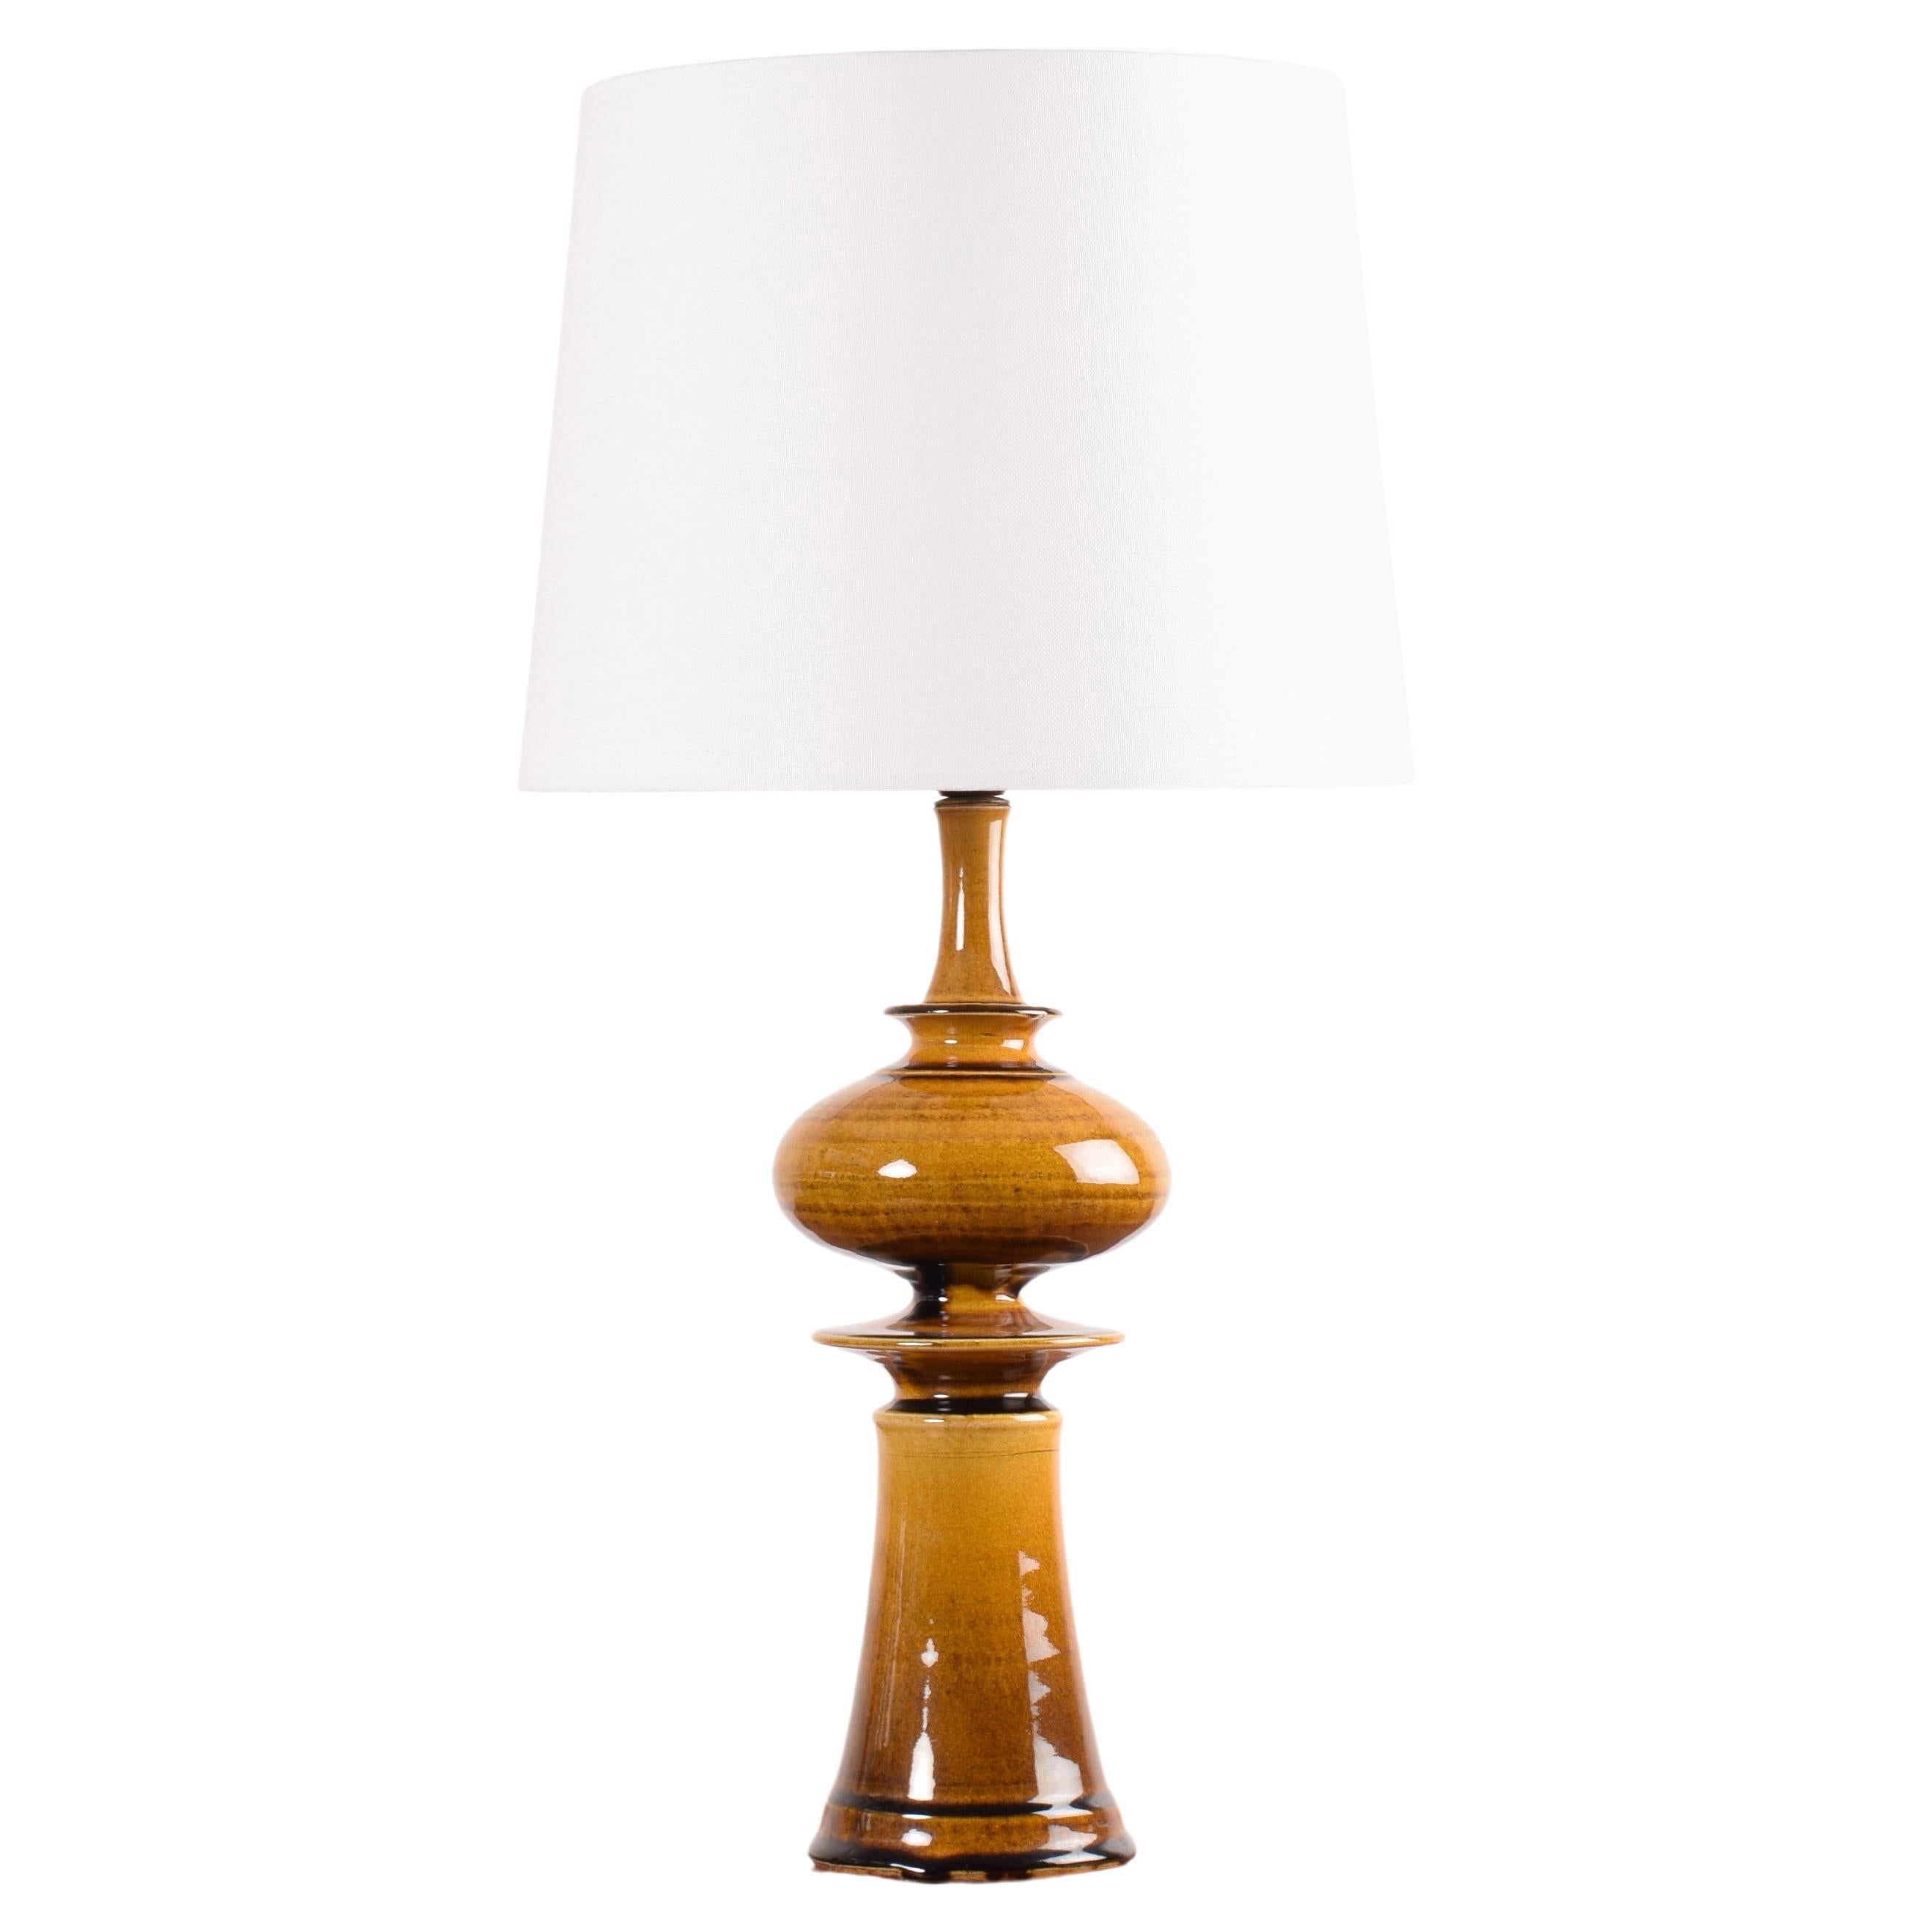 Danish Modern Kähler Sculptural Table Lamp Amber Yellow by P E Eliasen, 1960s For Sale